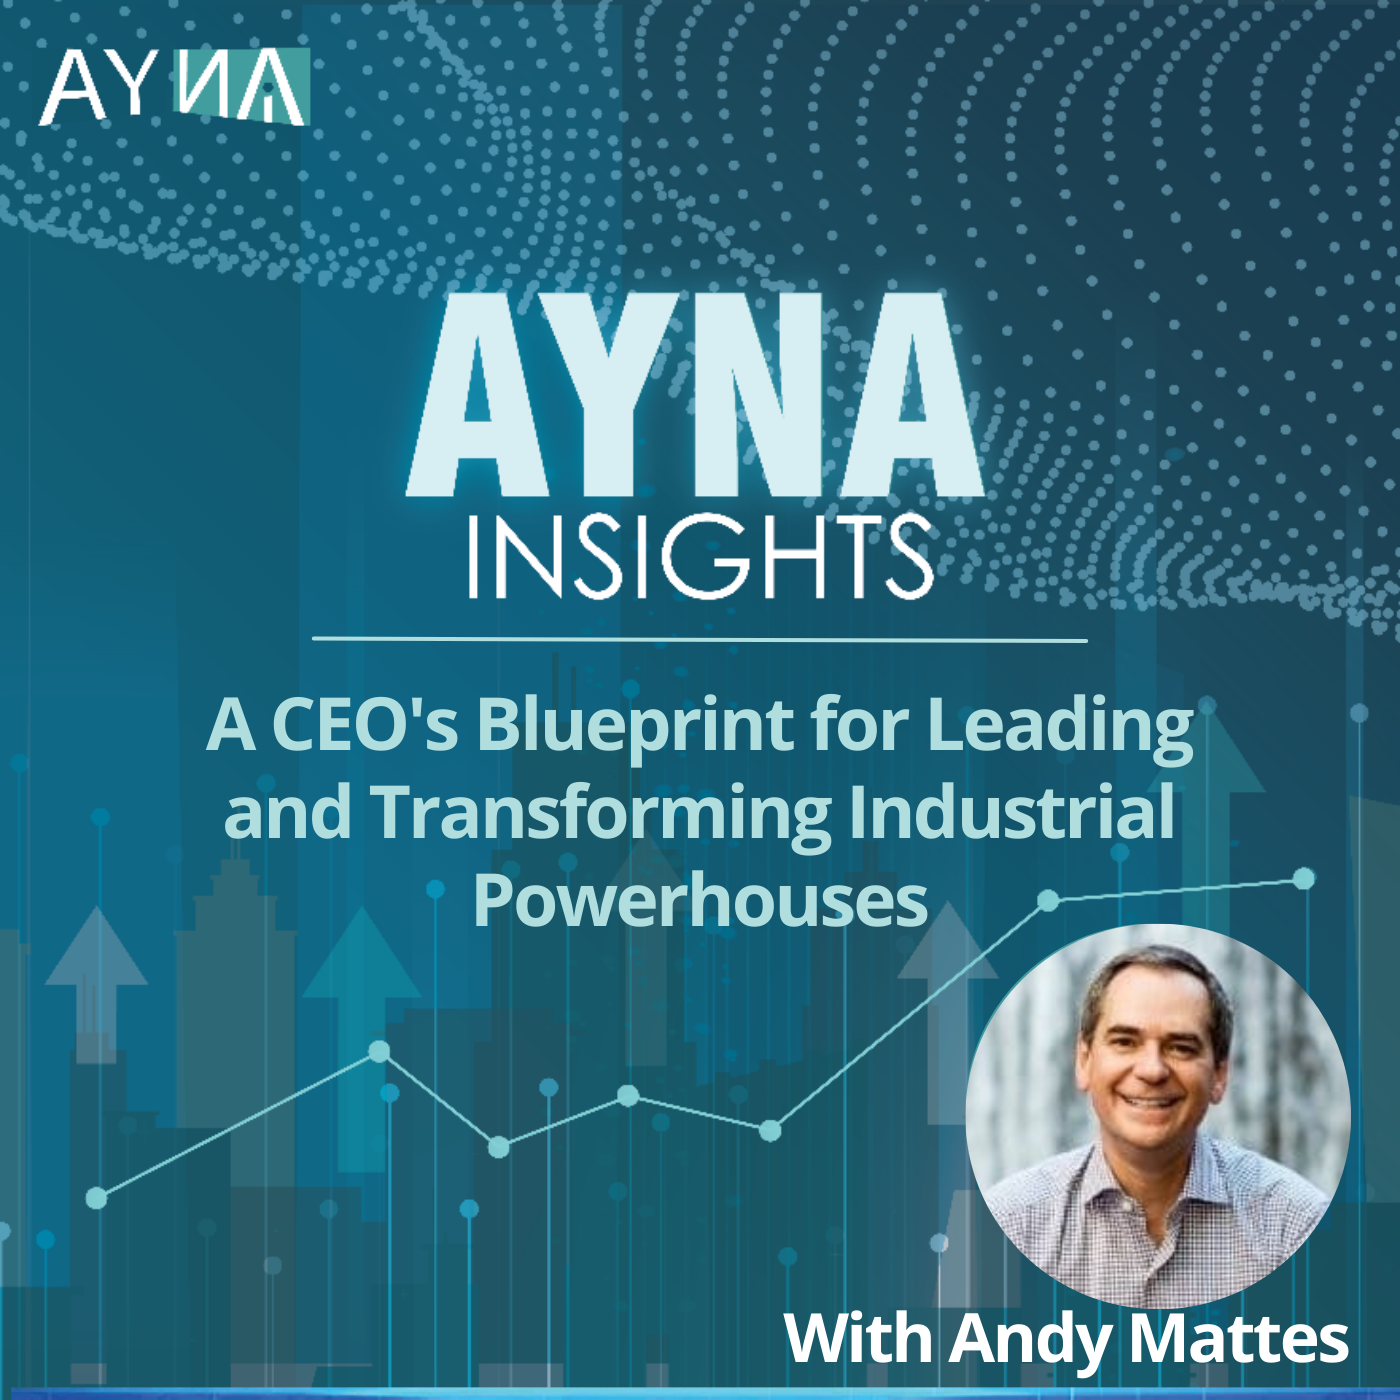 Andy Mattes: A CEO's Blueprint for Leading and Transforming Industrial Powerhouses